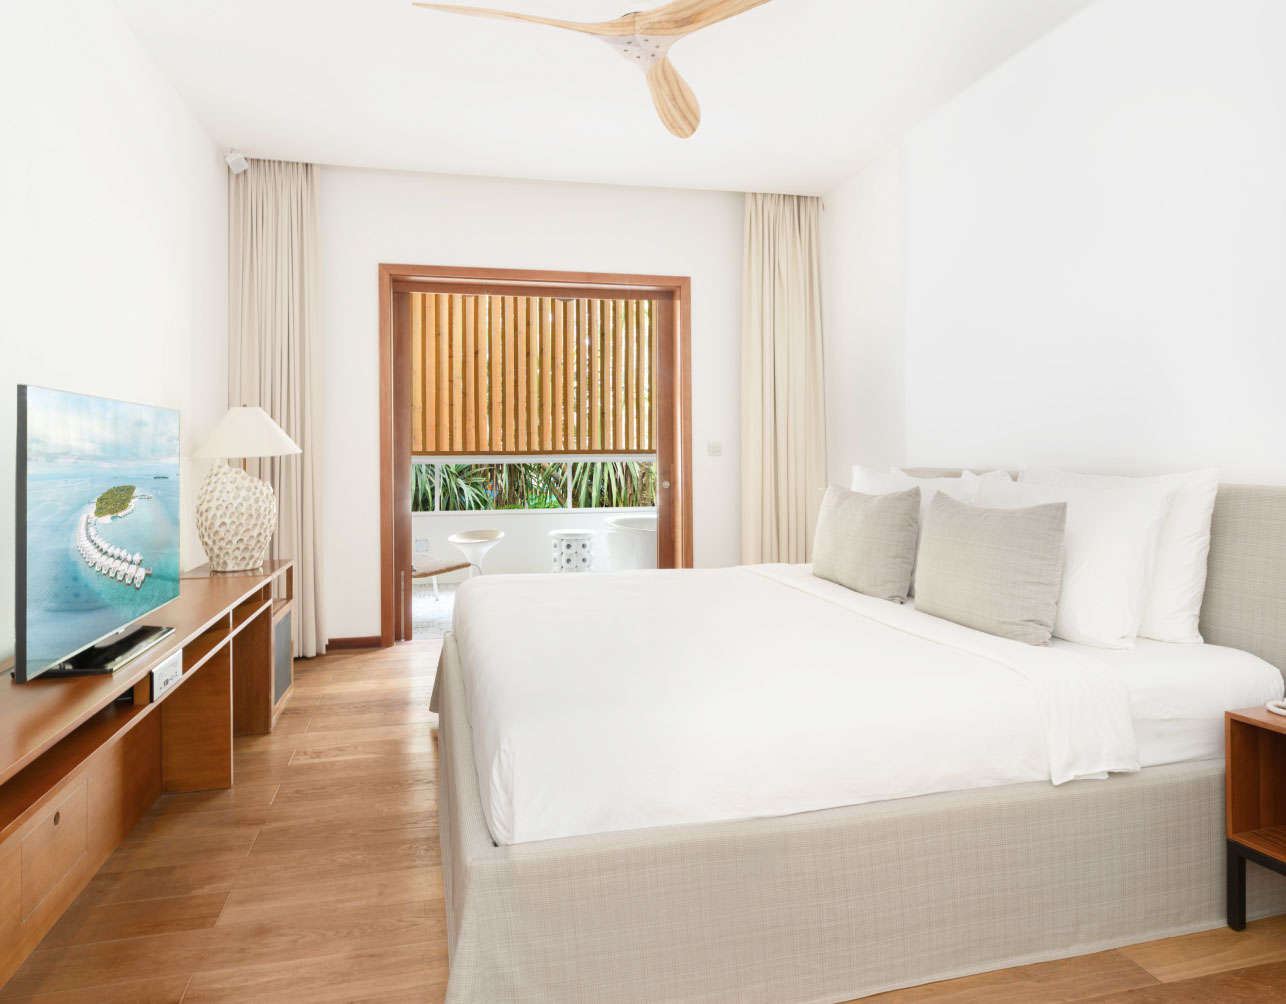 A guest suite with a king bed and private balcony in our our Private Residence in the Maldives.